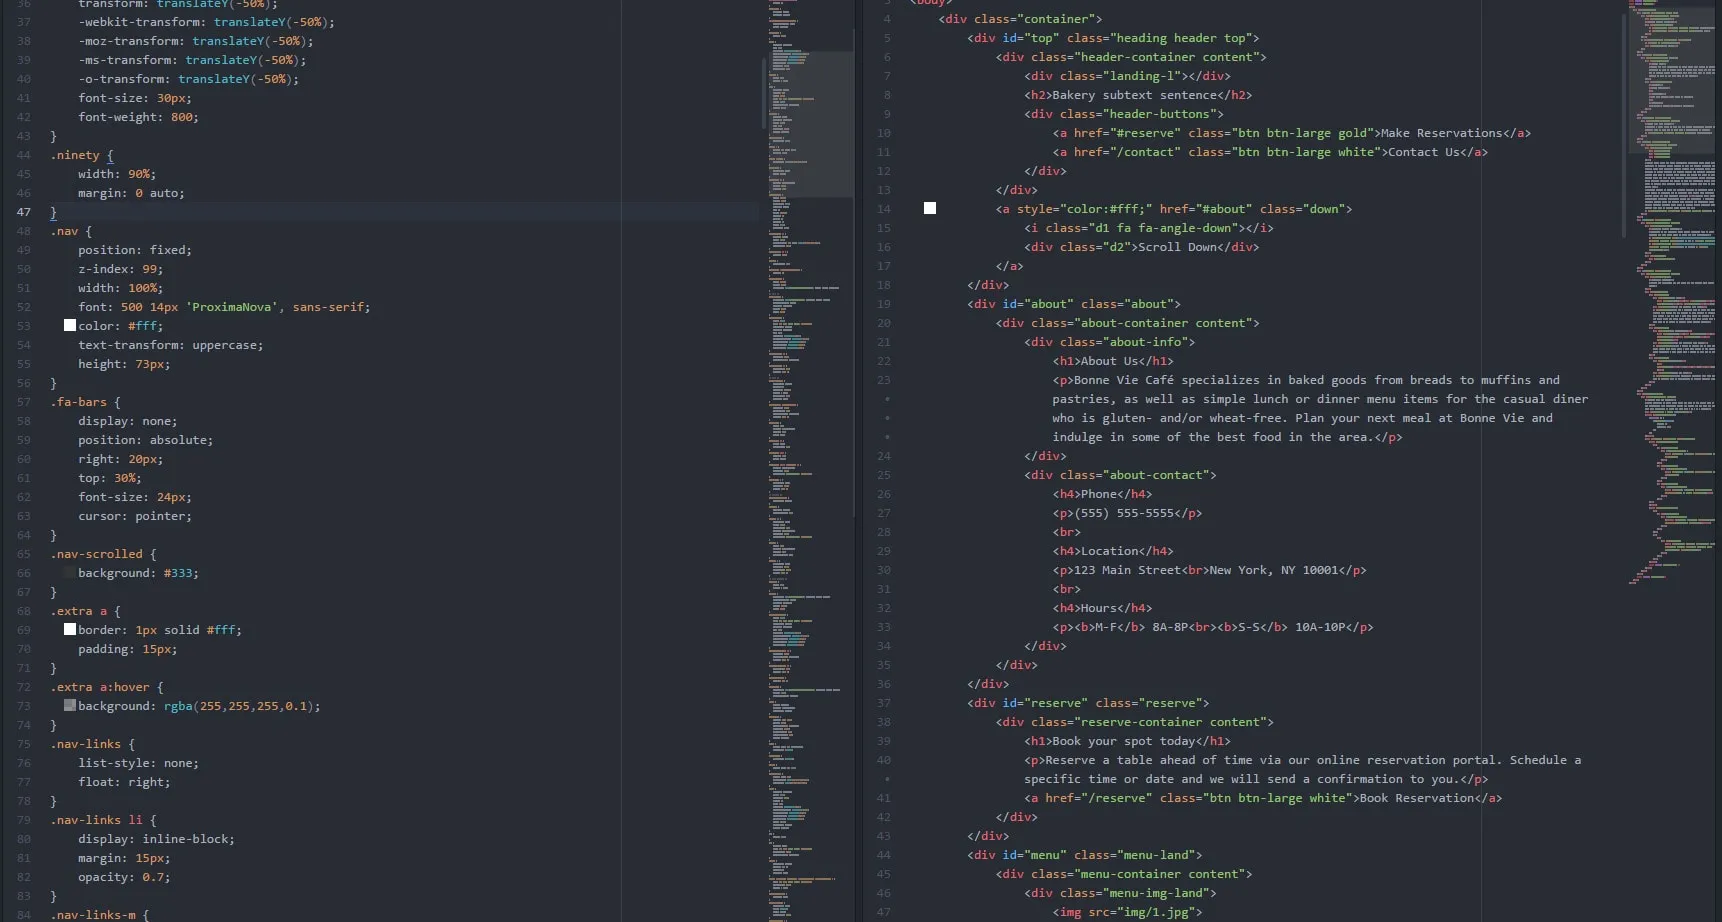 Stylesheet and index side-by-side